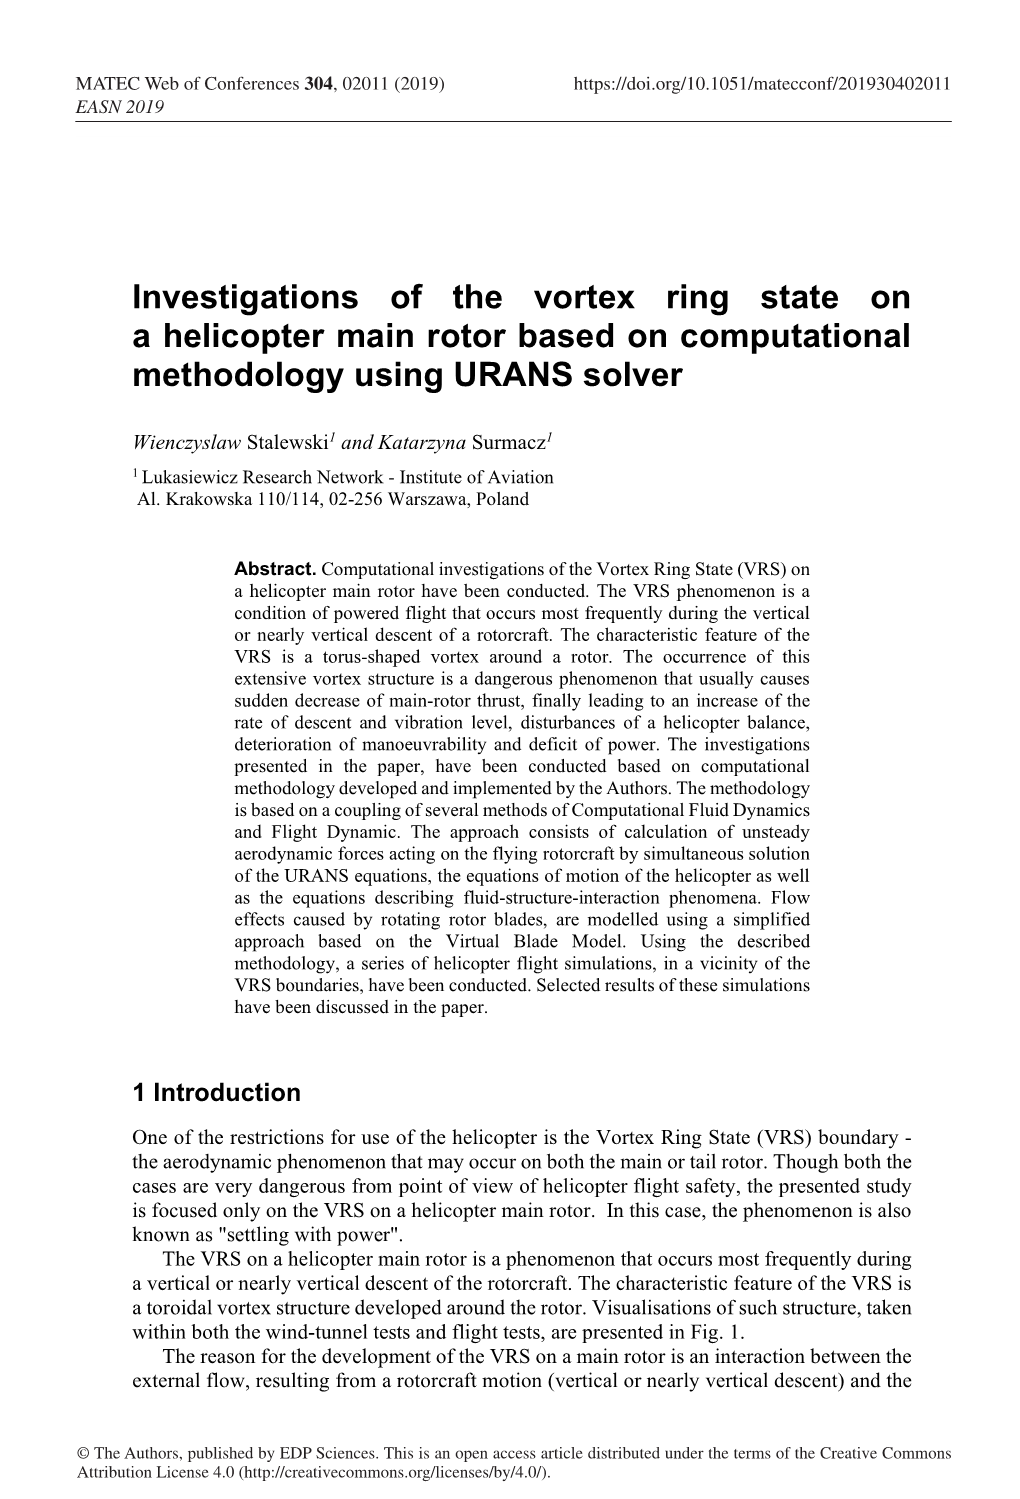 Investigations of the Vortex Ring State on a Helicopter Main Rotor Based on Computational Methodology Using URANS Solver